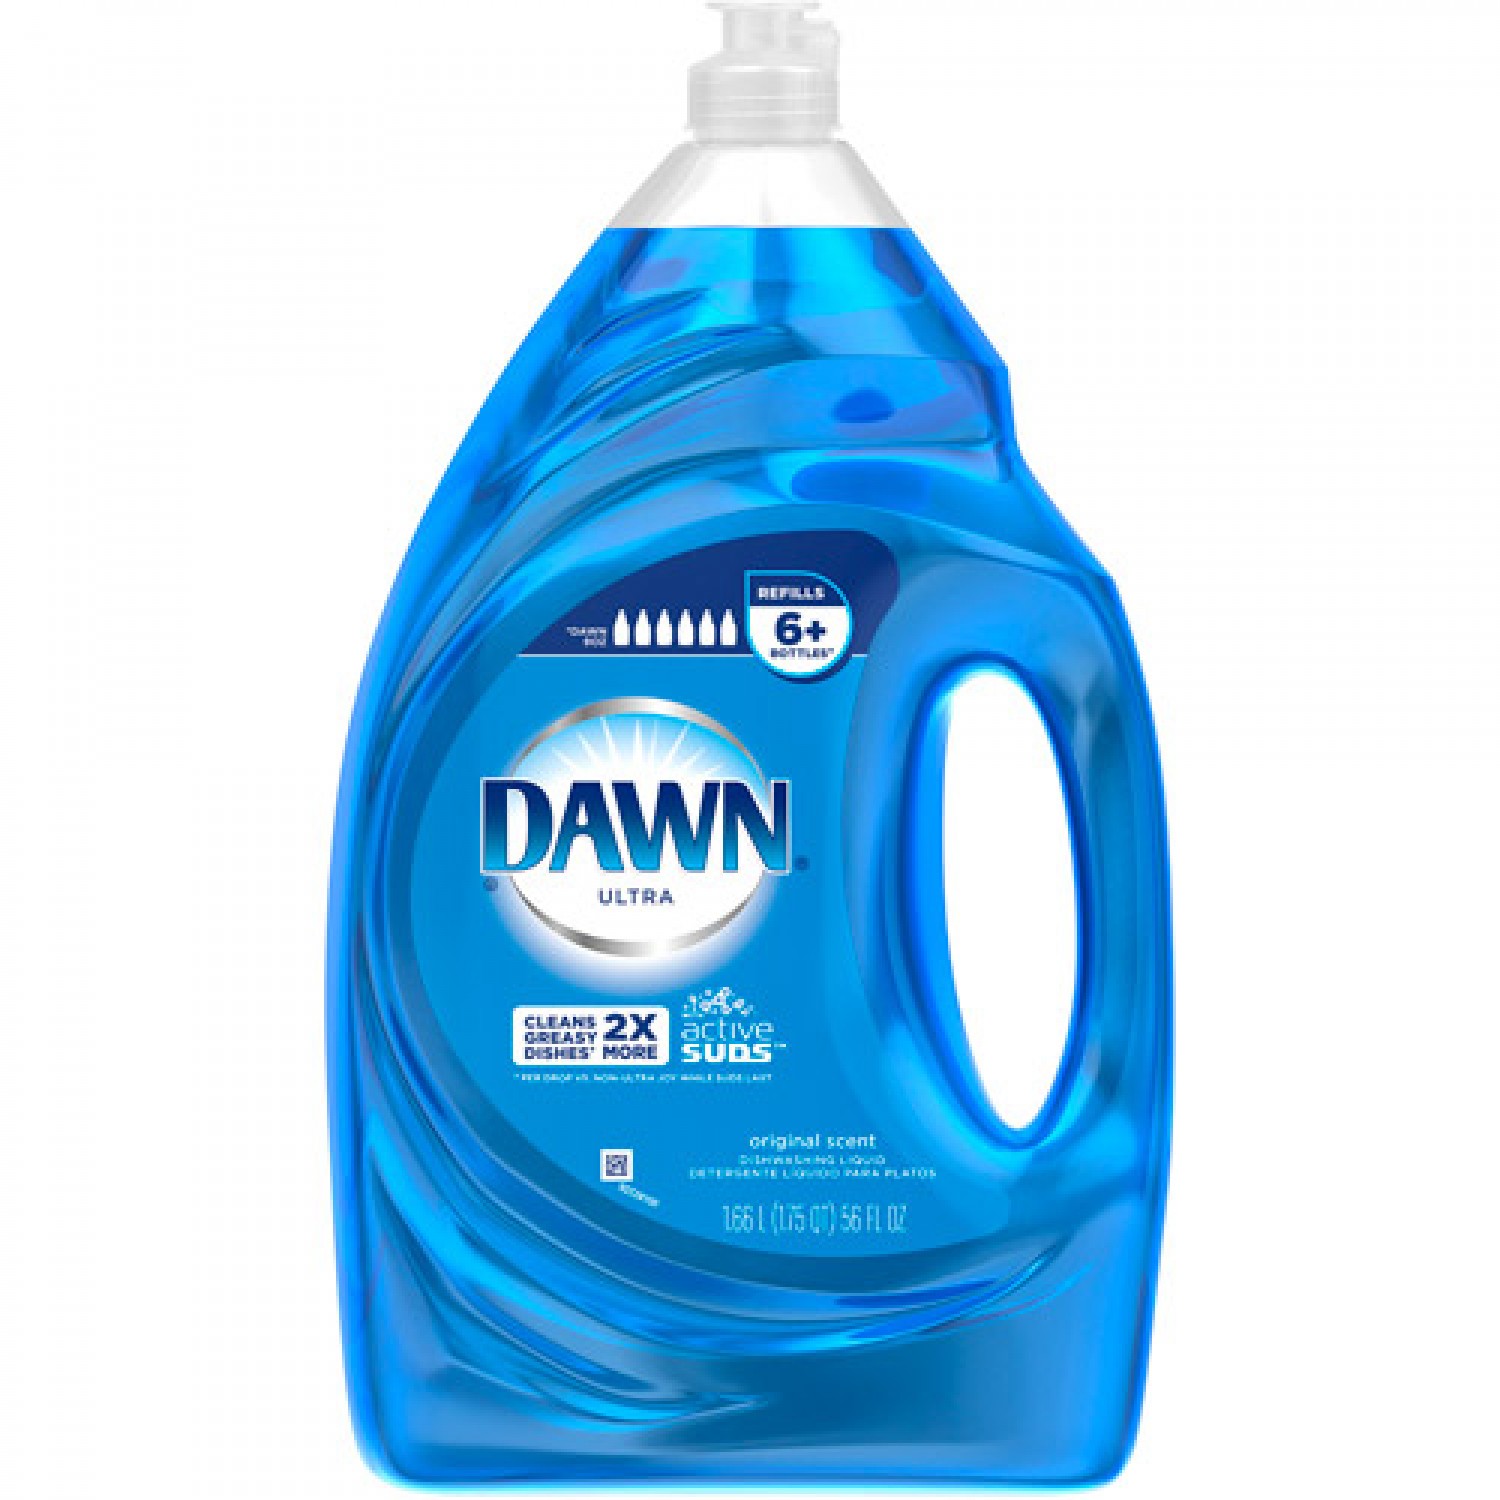 Dawn Detergent Isn't Just For Dishes